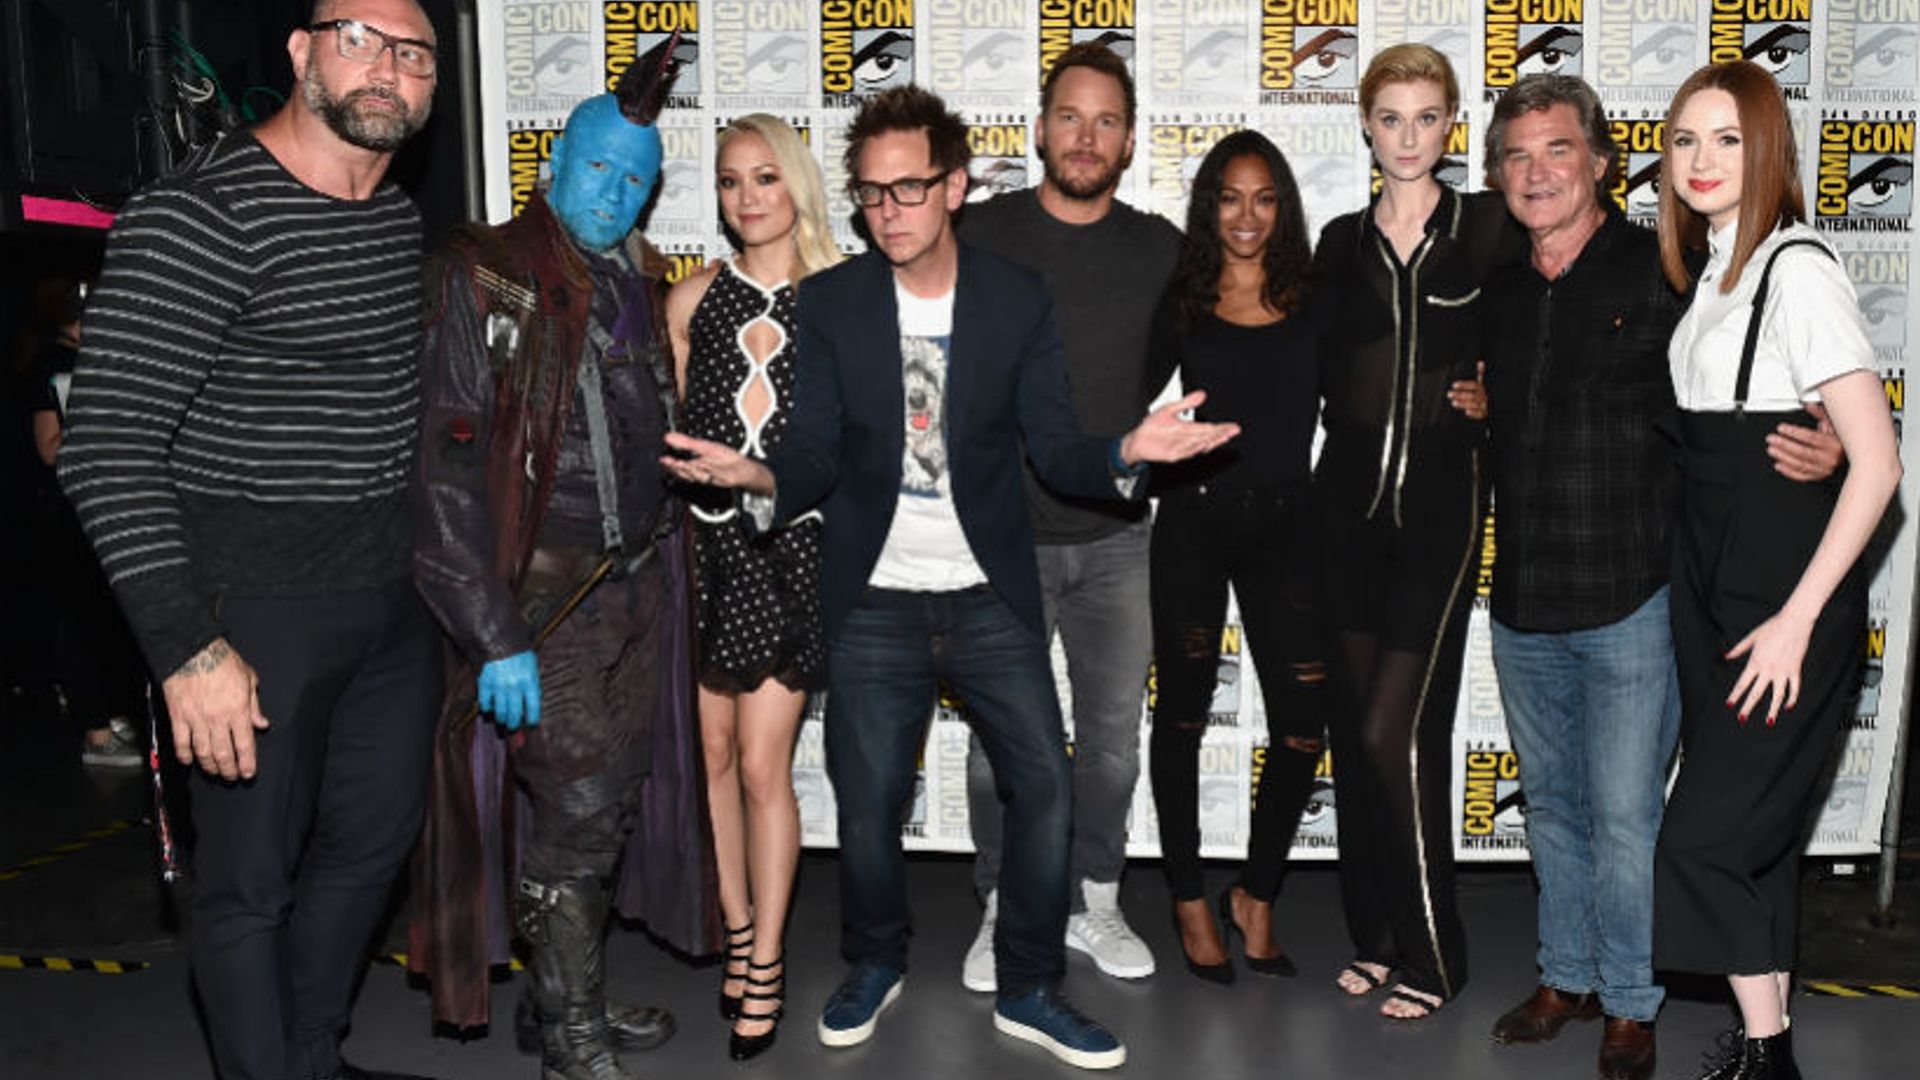 Guardians of the Galaxy stars criticised after throwing support behind fired director James Gunn